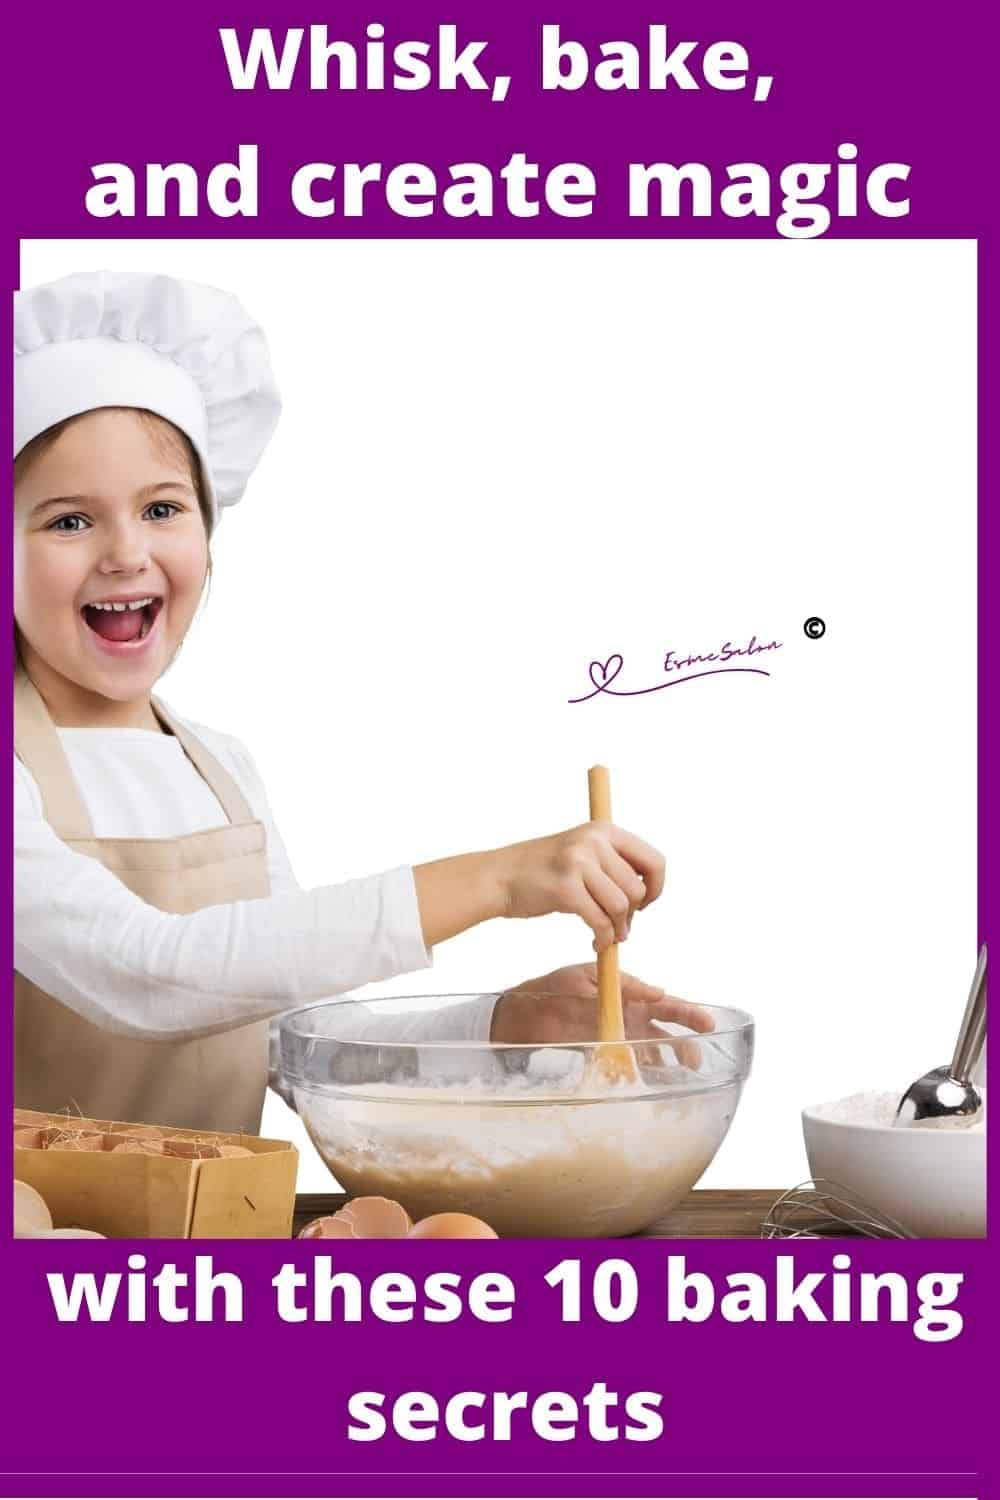 an image of a girl with a white chef hat busy mixing dough